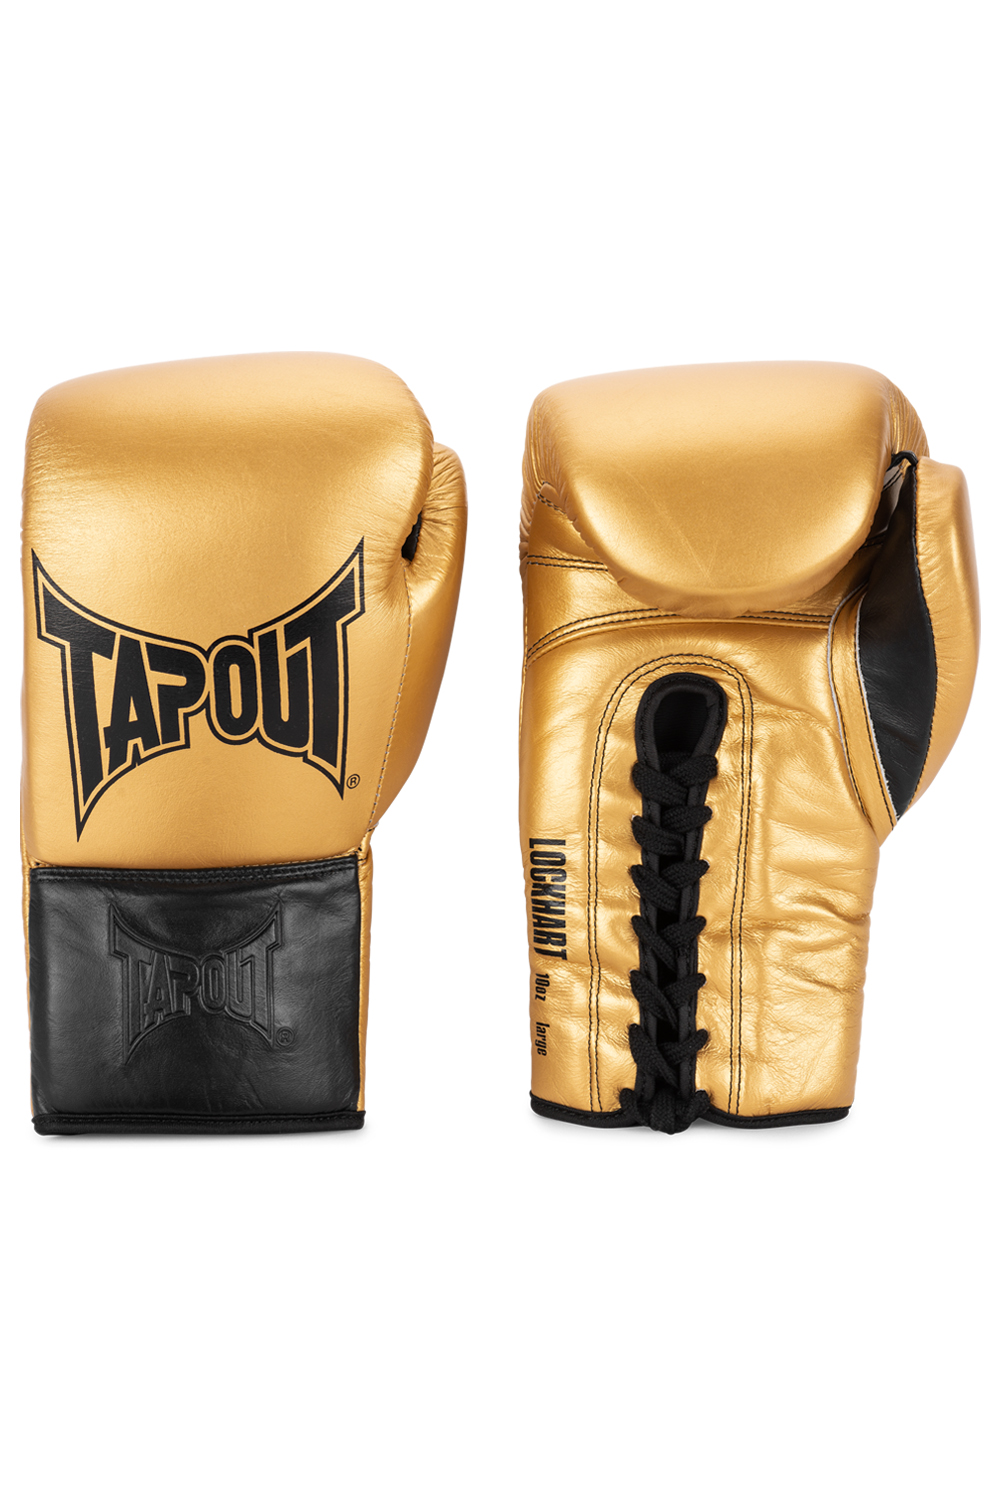 Tapout Leather Boxing Gloves (1 Pair)